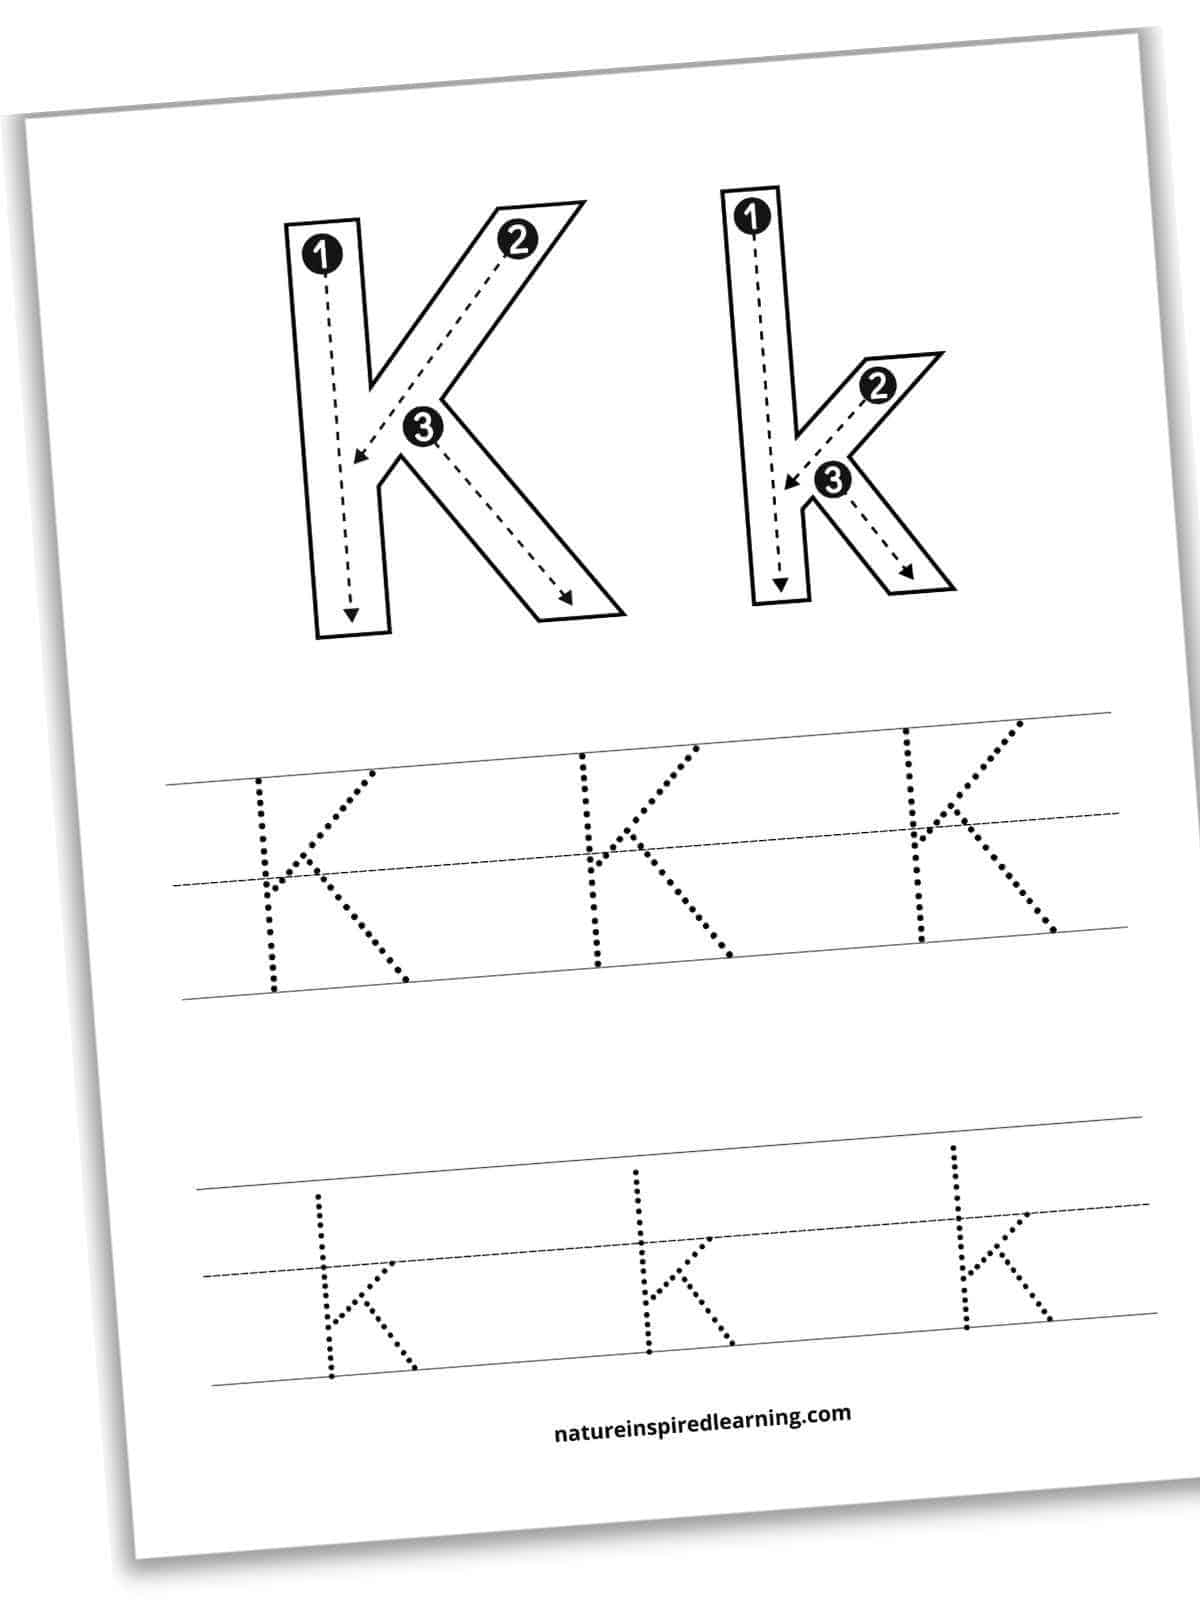 Worksheet with large outlines of K and k with dashed lines, arrows, and numbers for tracing inside each letter. Two sets of lines one with three uppercase K's in dotted font above a set with three dotted k's